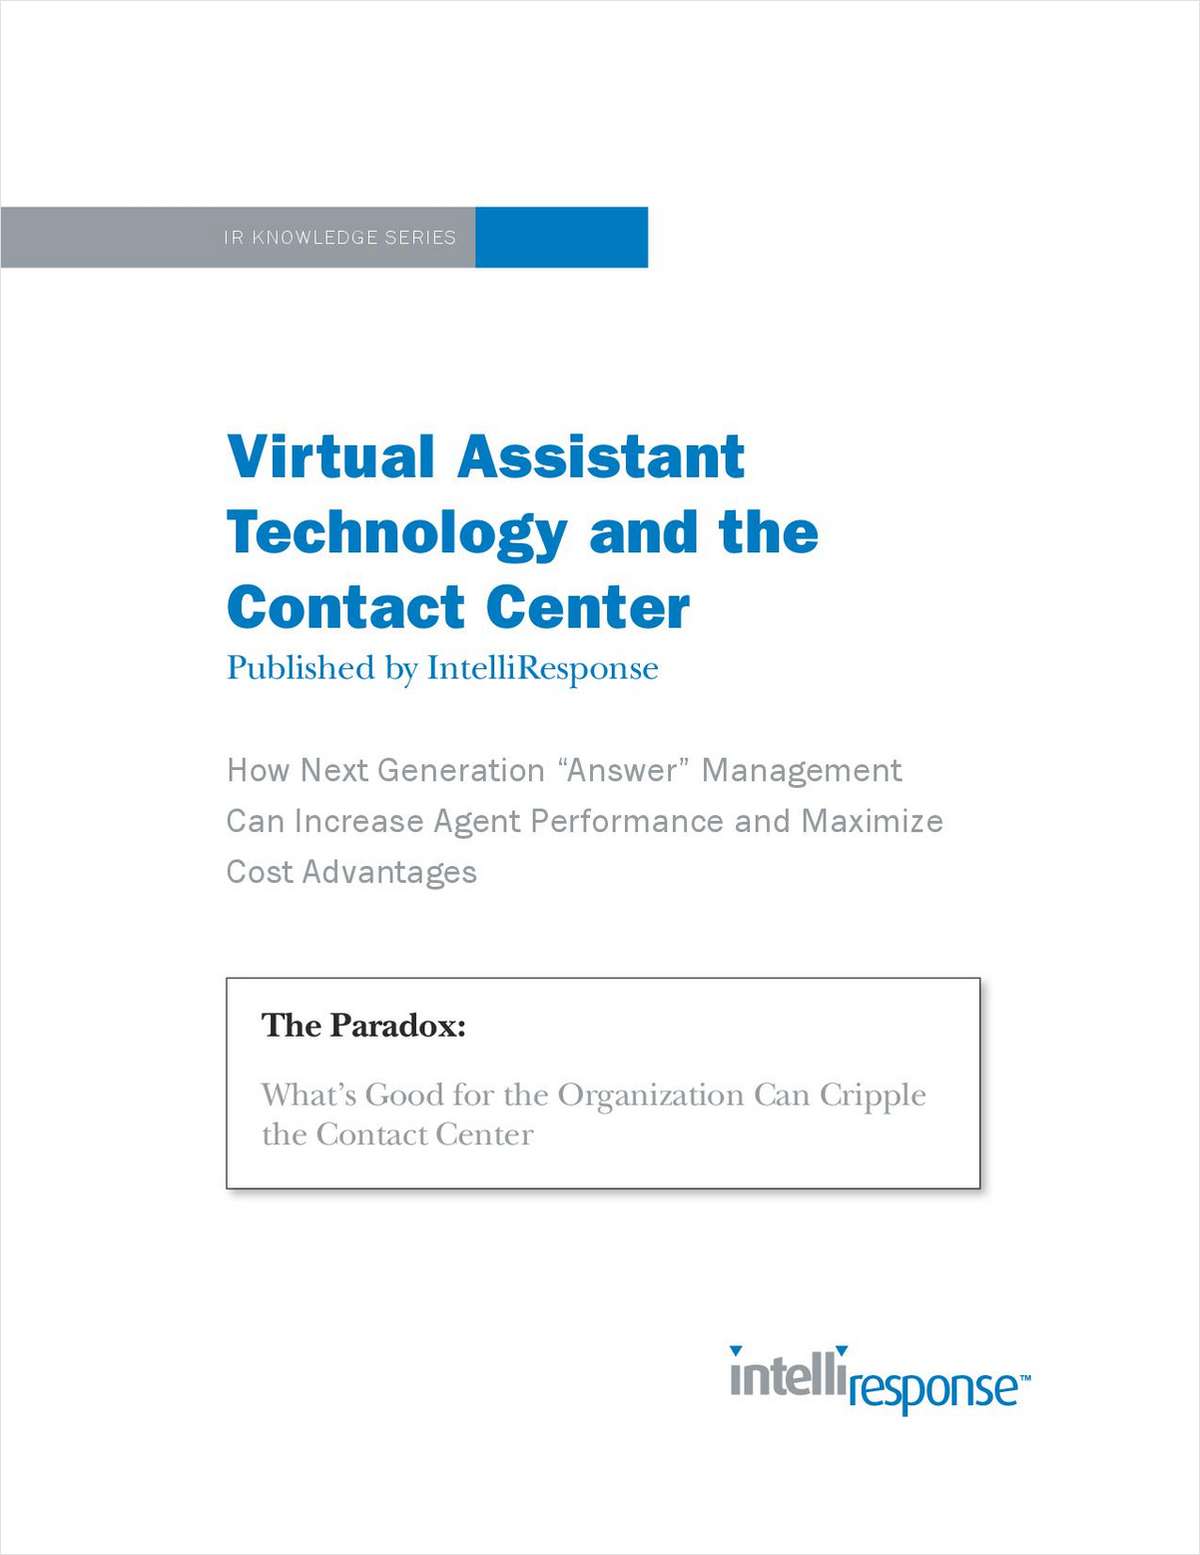 Virtual Assistant Technology and the Contact Center